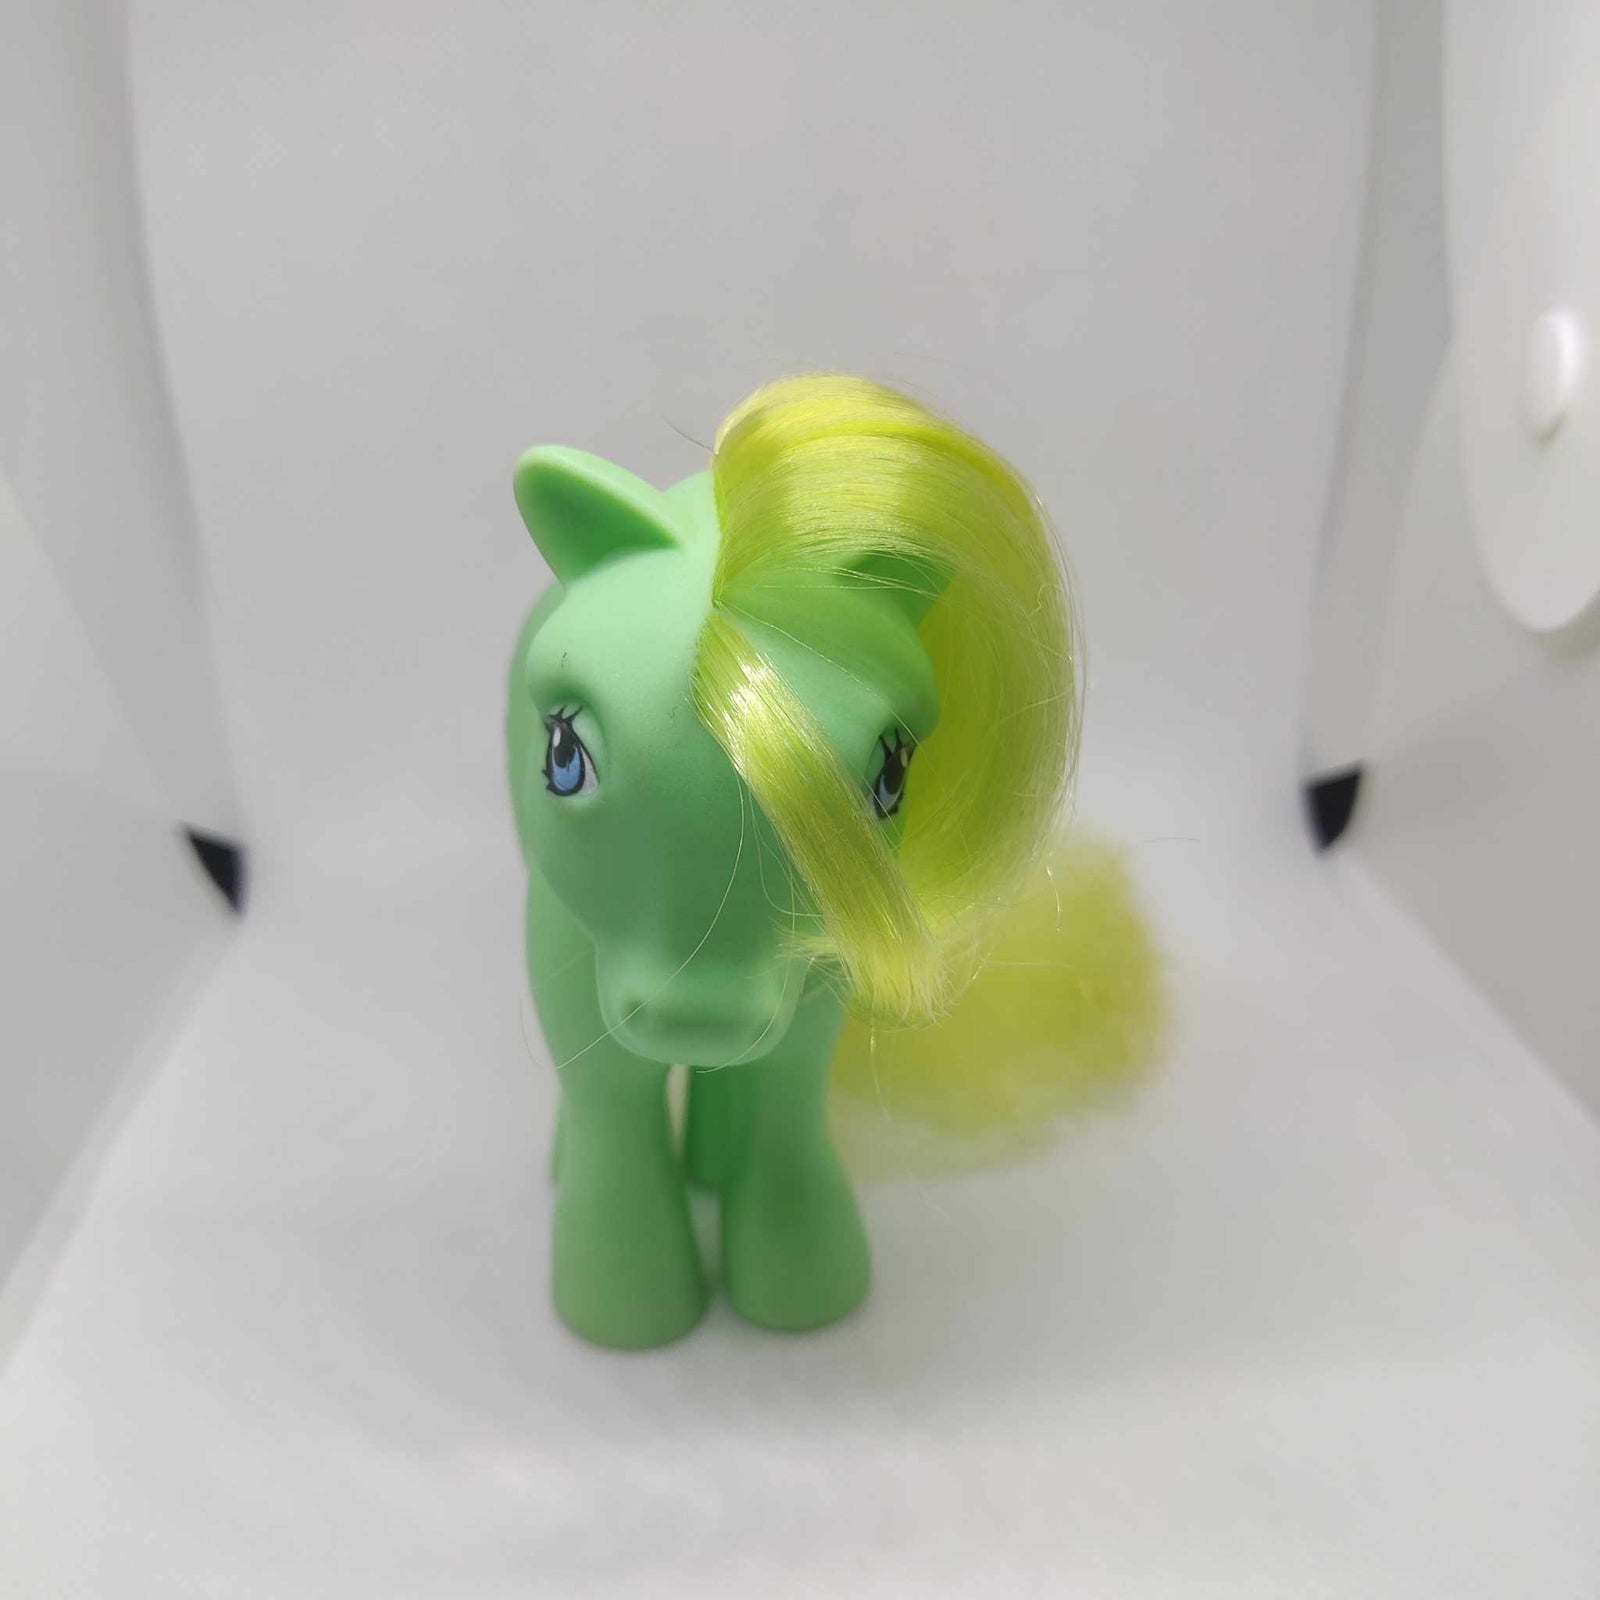 My Little Pony, May Lily of the valley, Hasbro